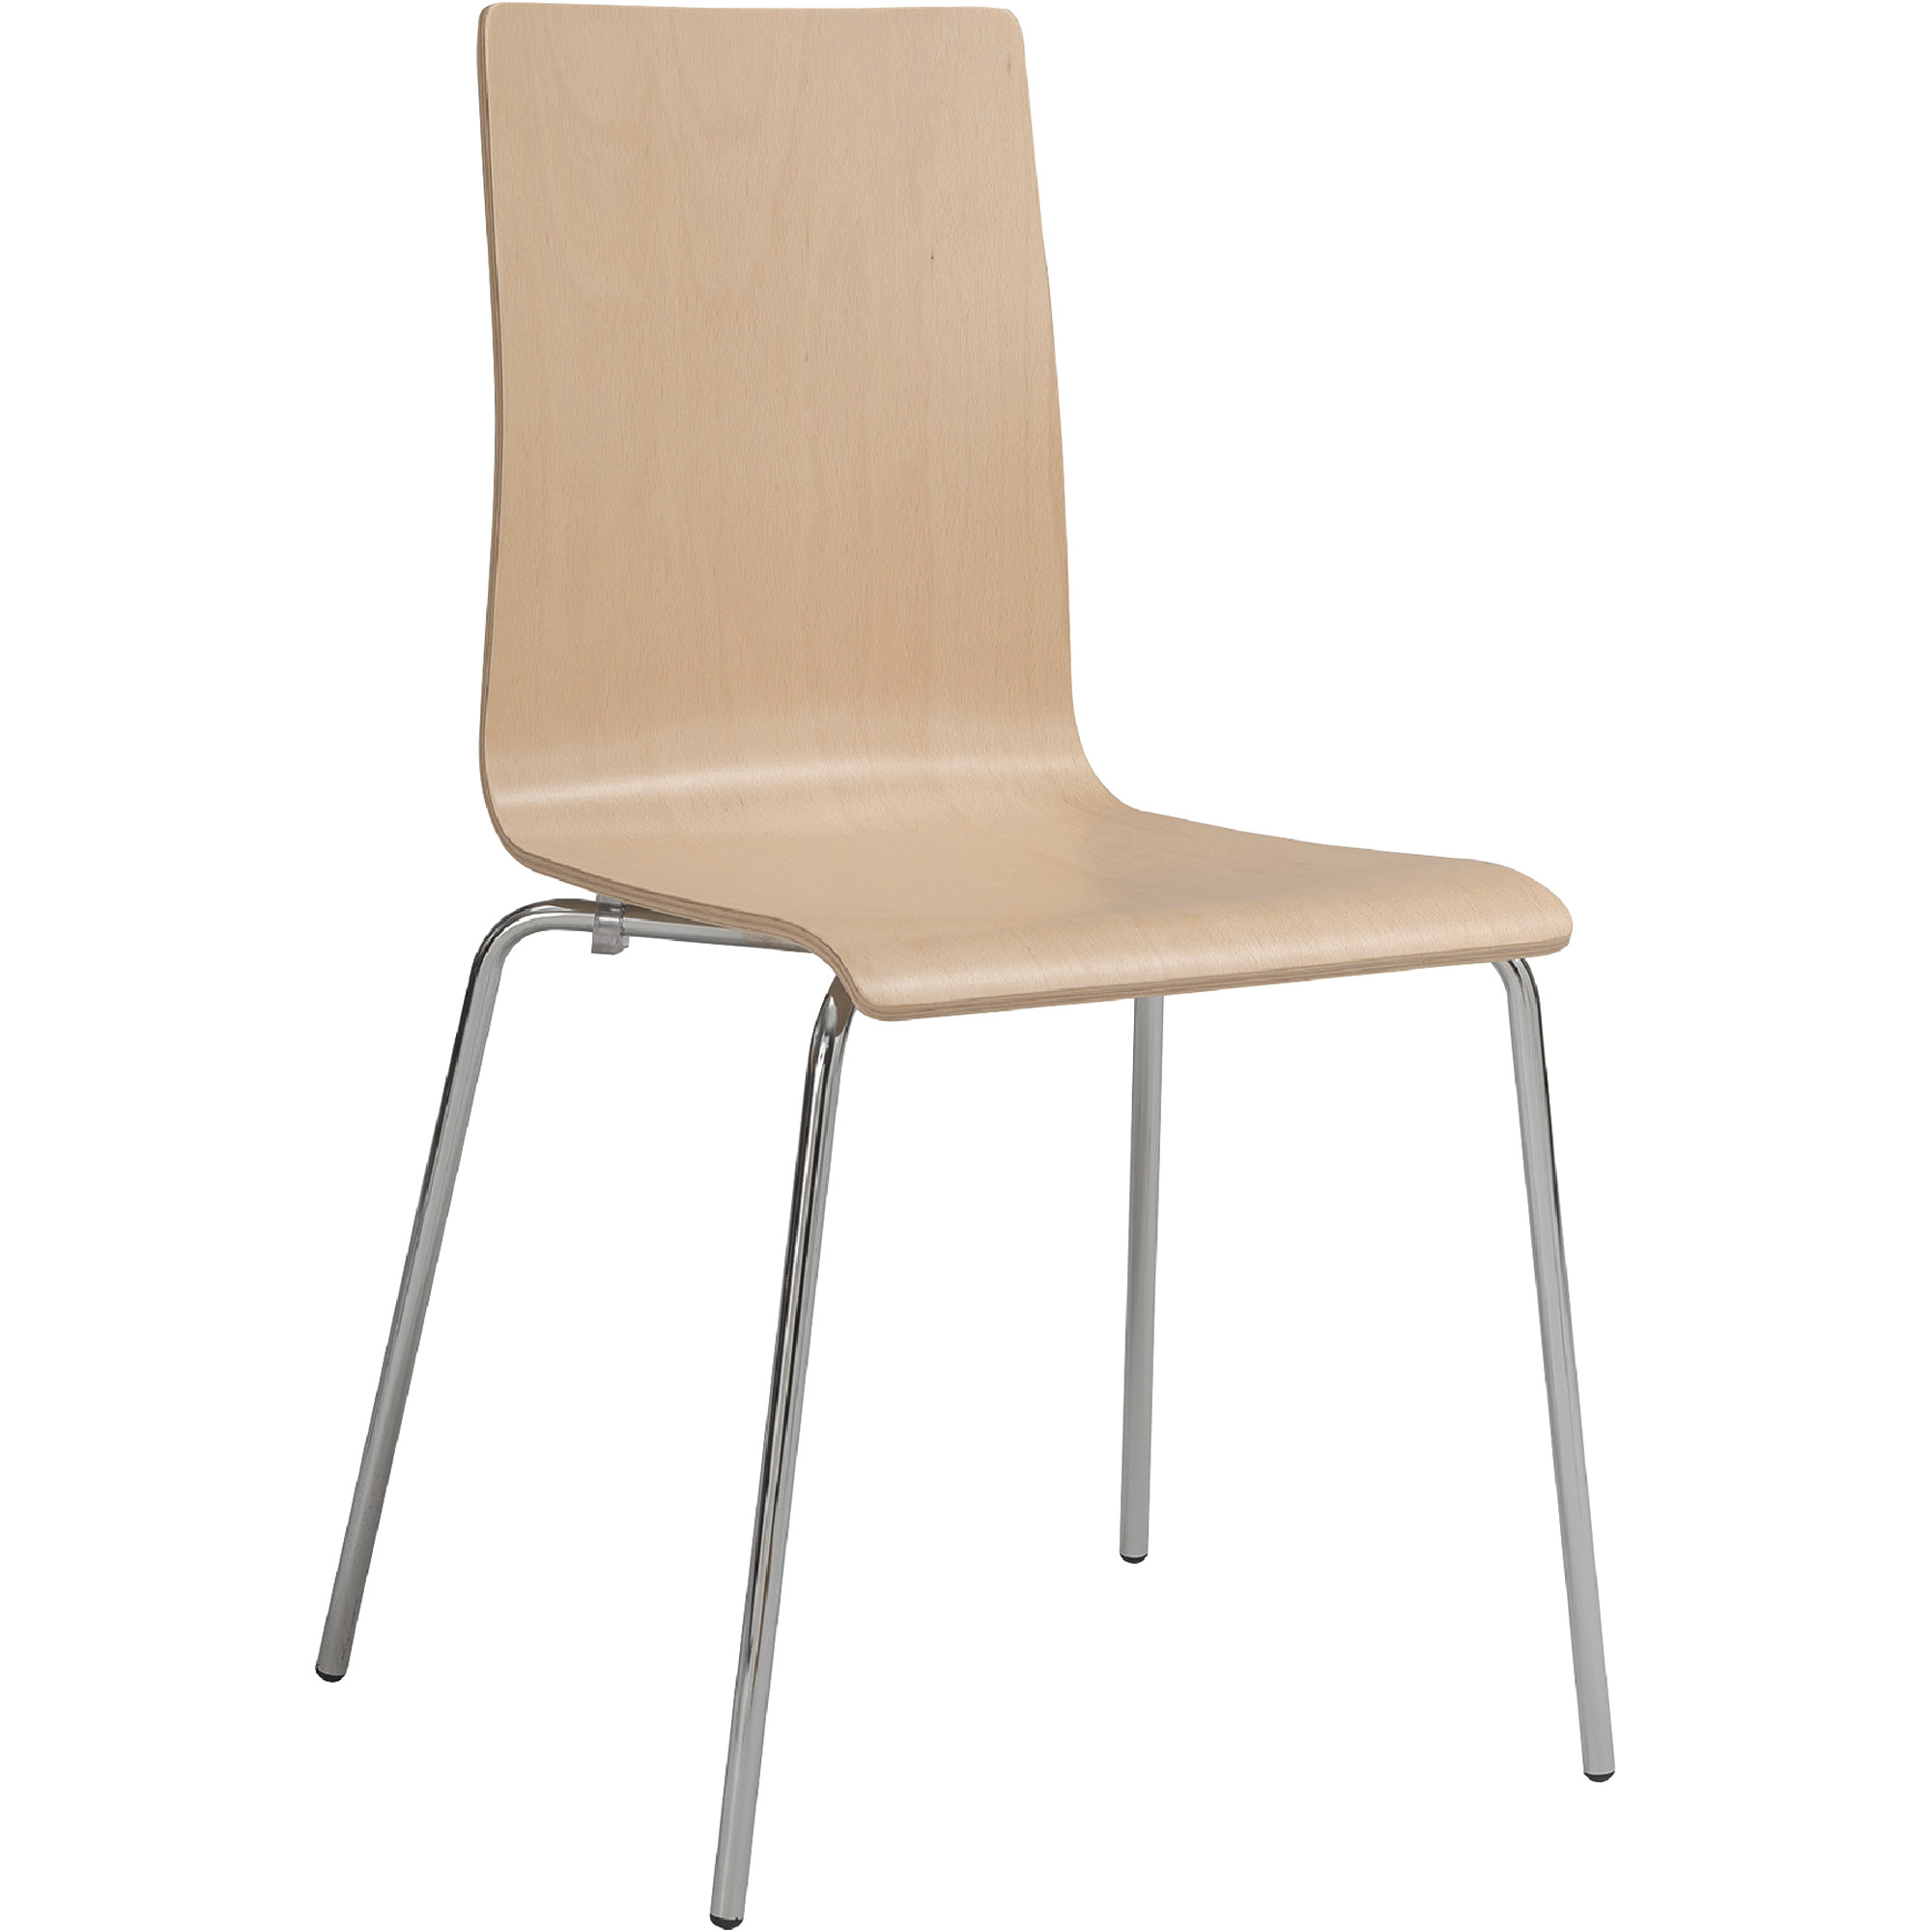 Safco Bosk Stack Chairs â Set of 2, Beech, Model 4298BH